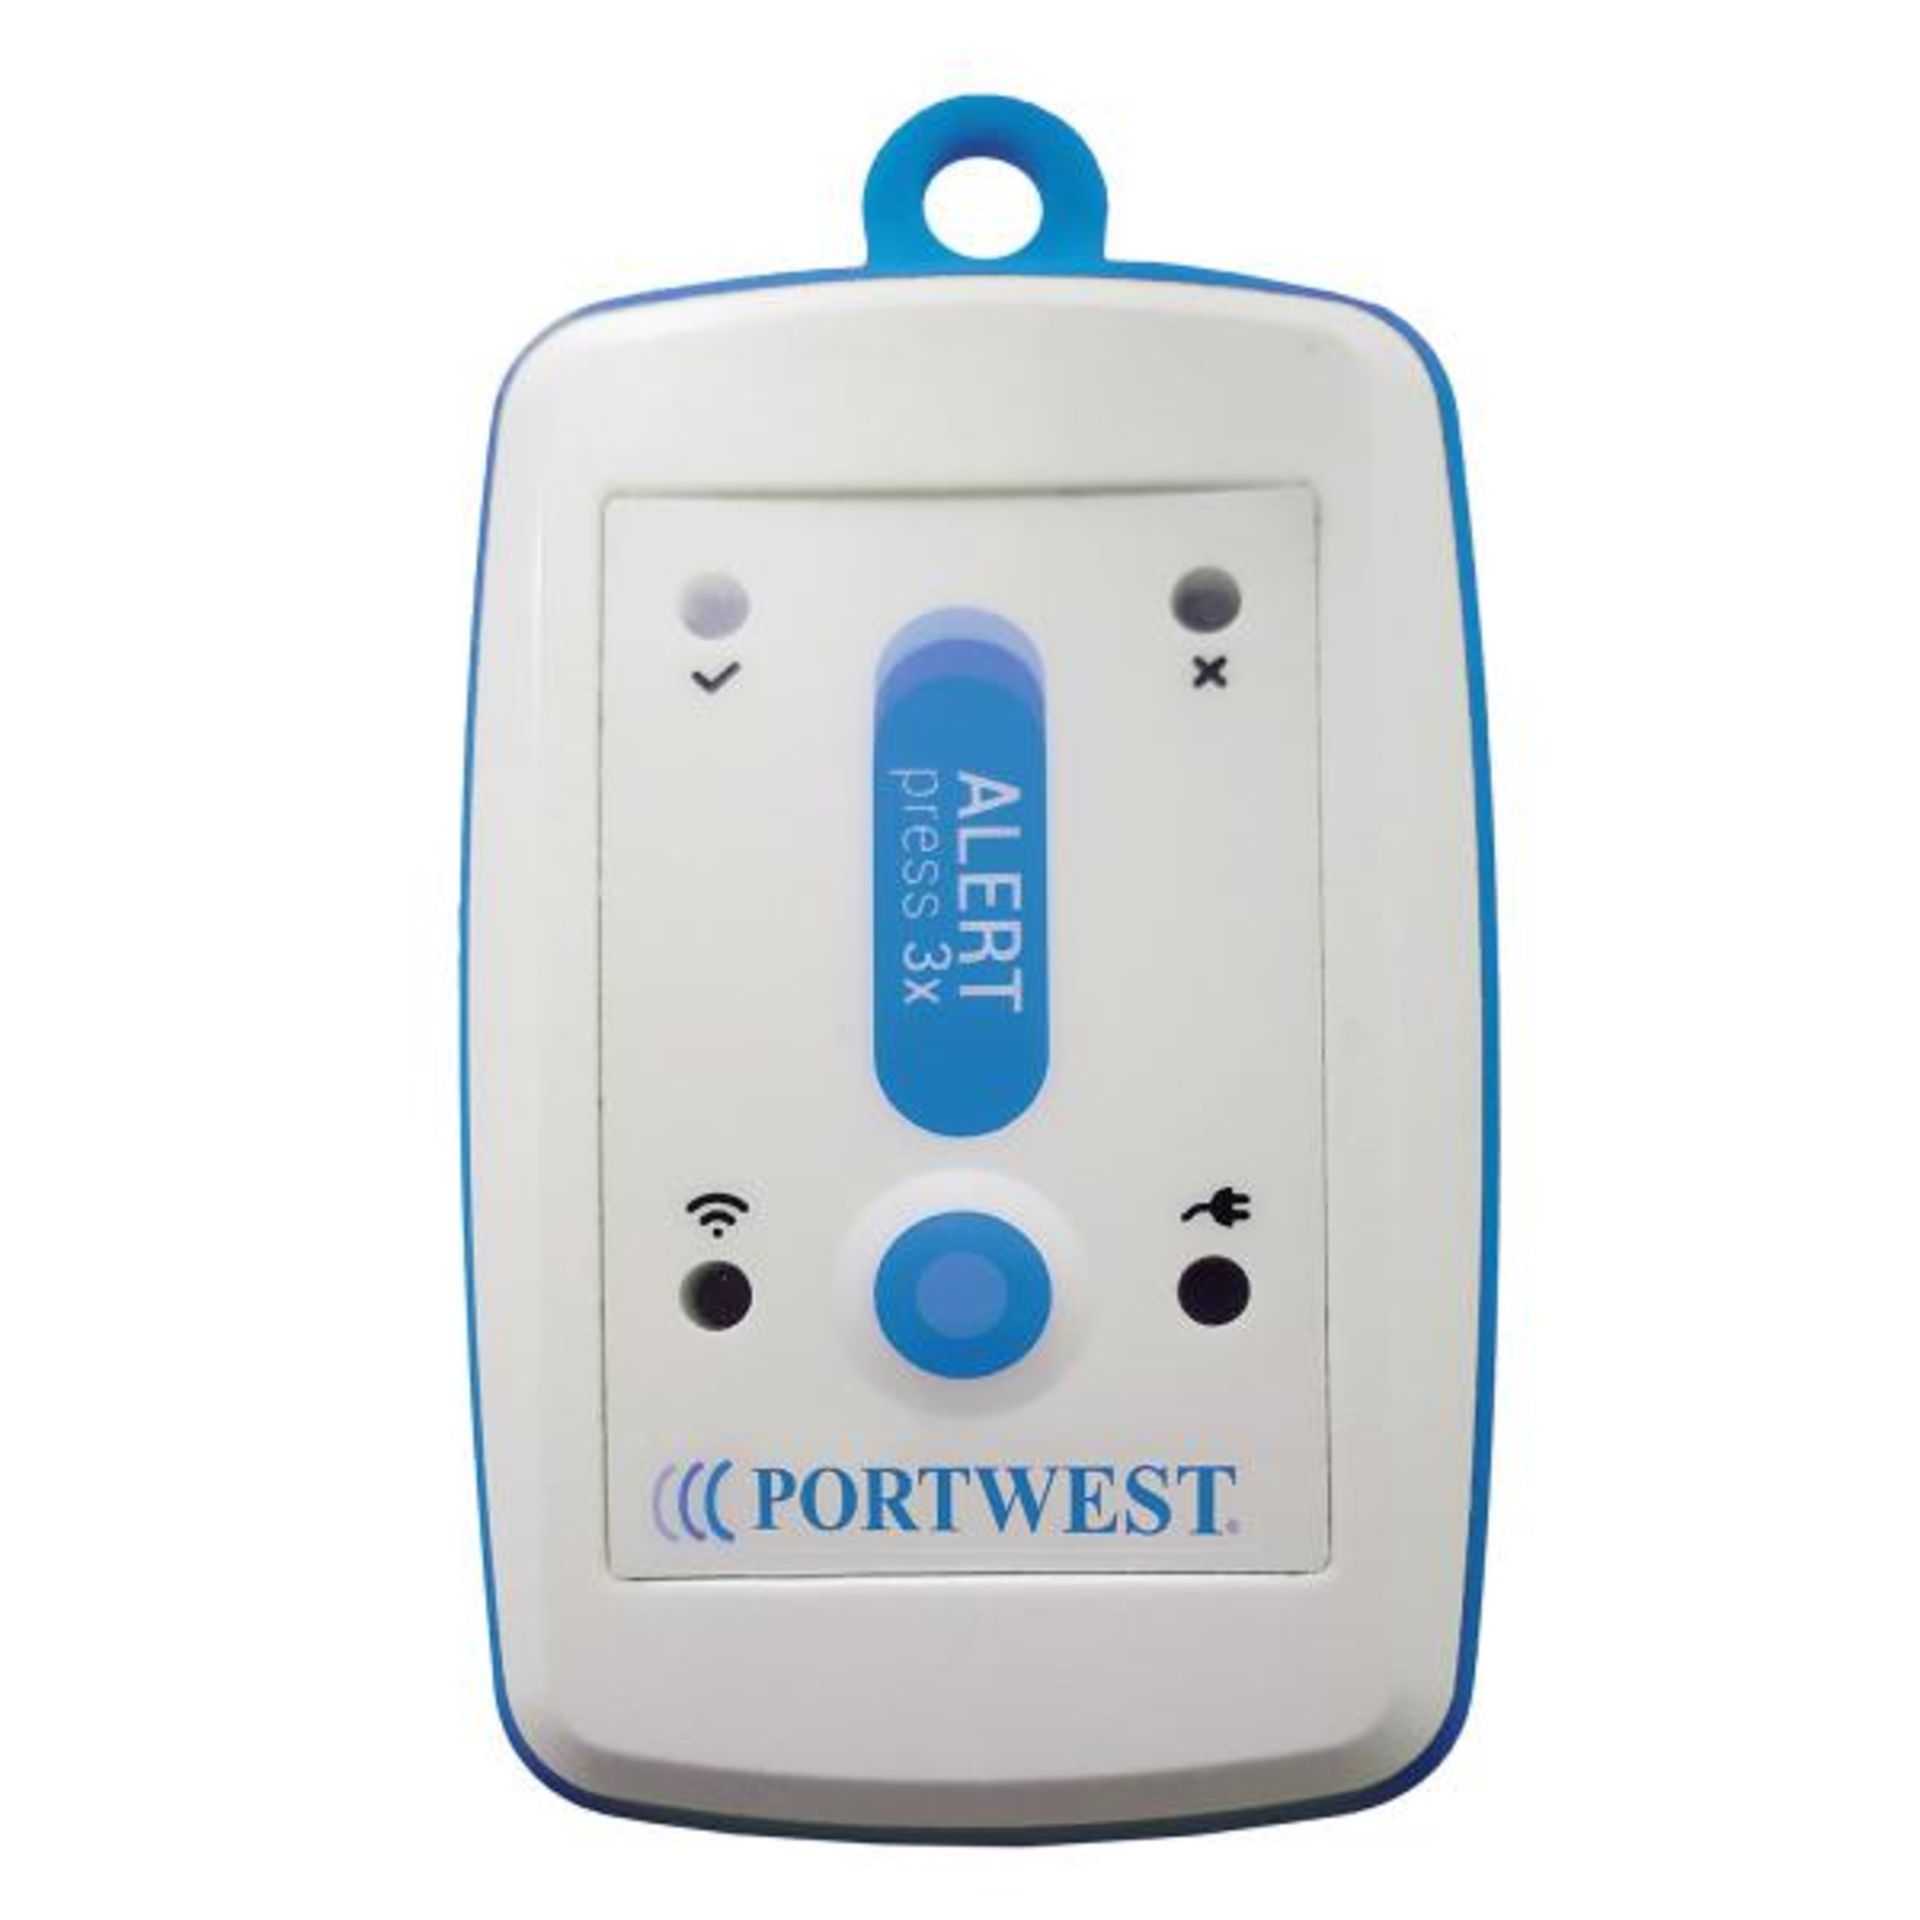 BRAND NEW PORTWEST GPS Locator. RRP £200. (PW). (PB10WBR). The Portwest GPS Locator V1 is a low-